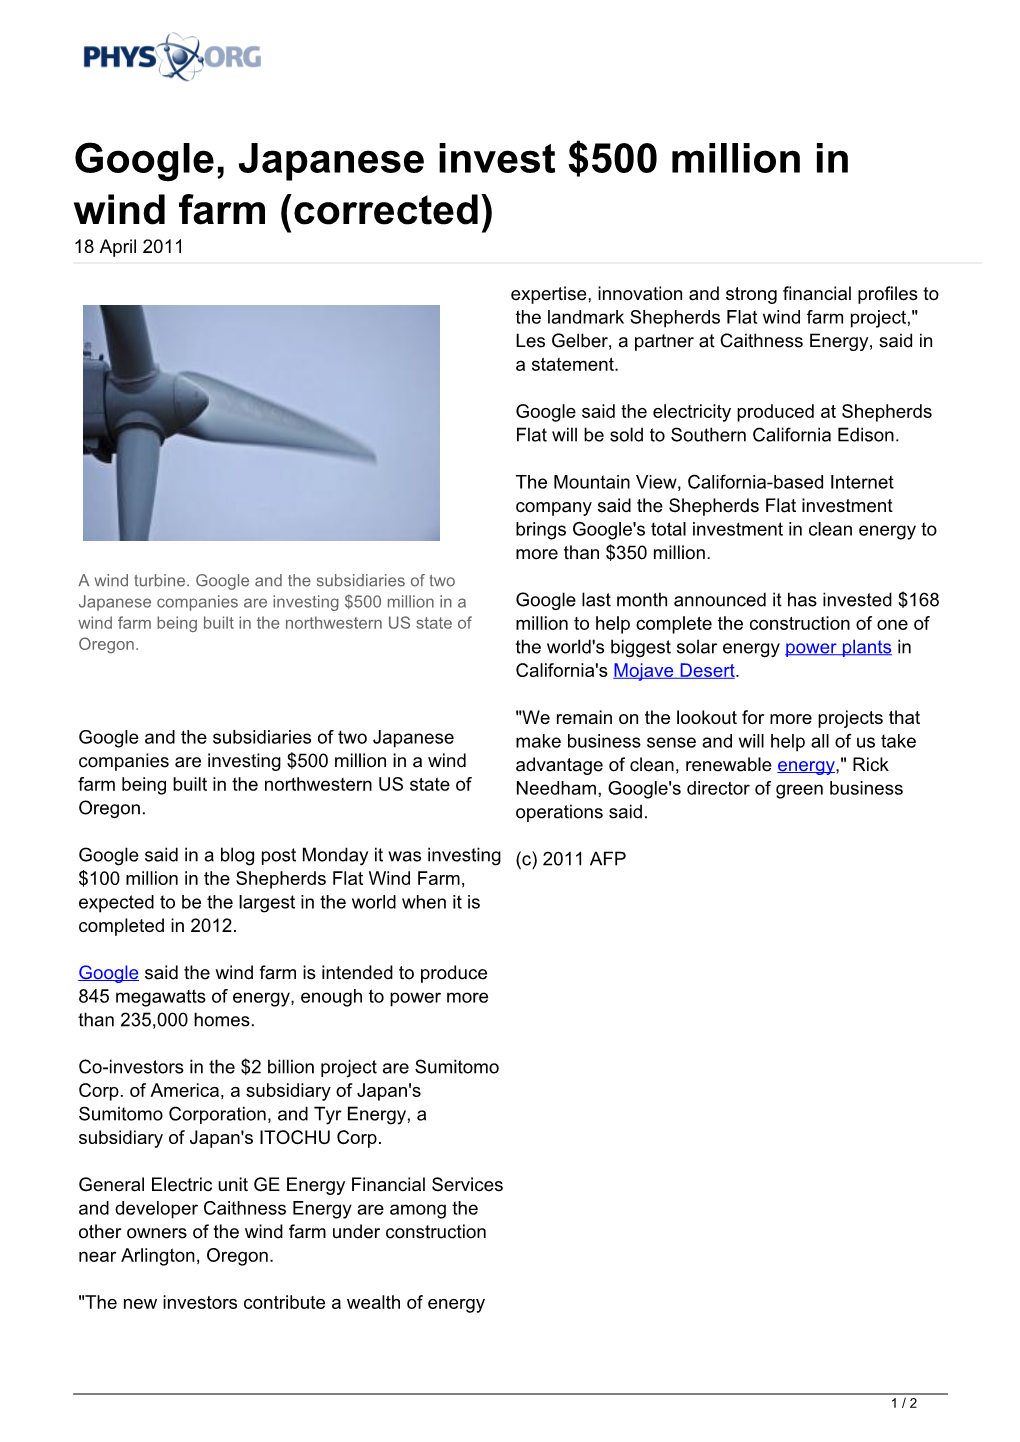 Google, Japanese Invest $500 Million in Wind Farm (Corrected) 18 April 2011